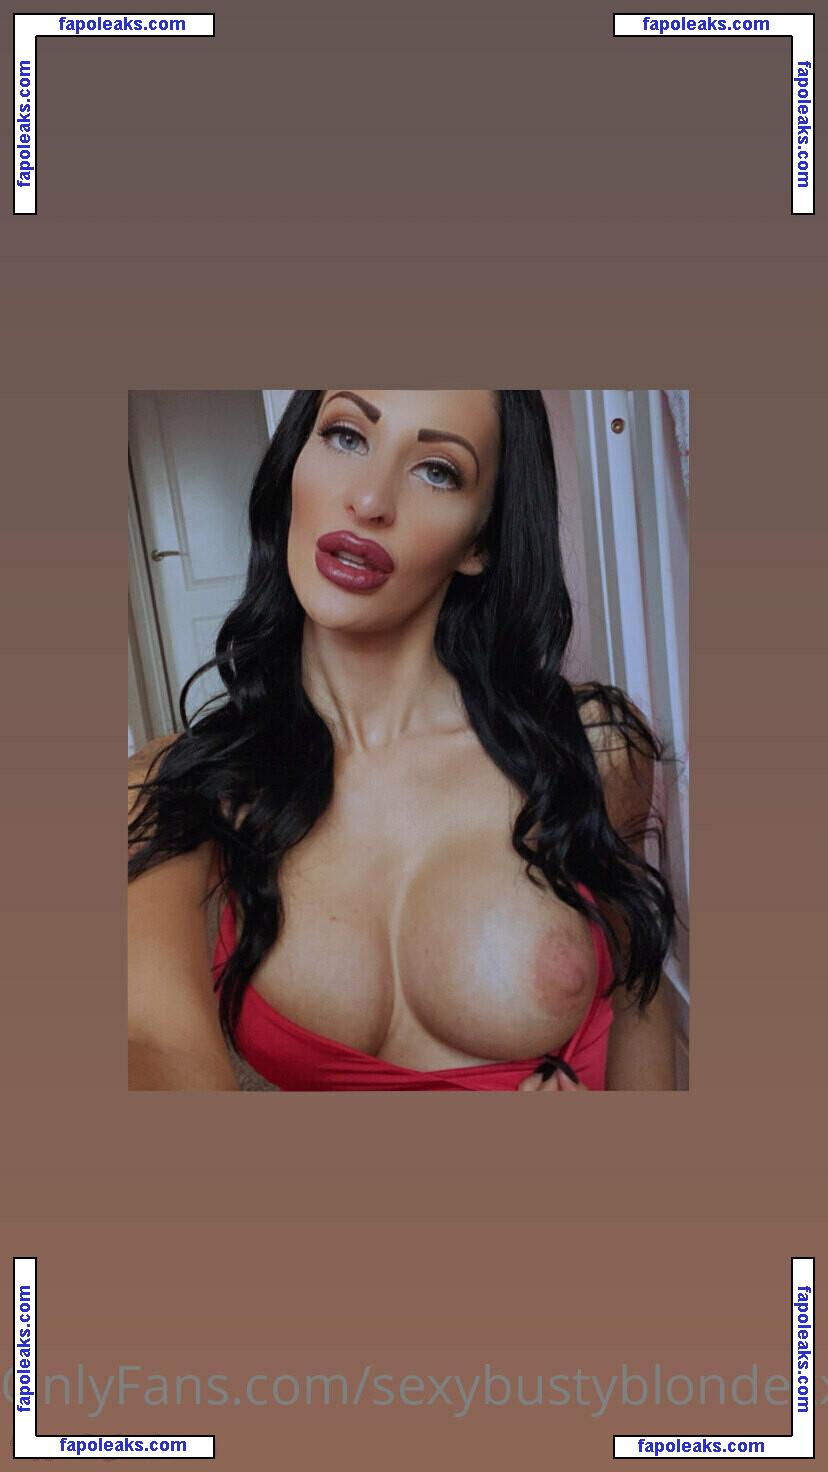 Tamsin Louise Hall / BUSTY BLONDE XXX / Miss Tamsin / sexybustyblondexxx / tamsinlouise_hall_ nude photo #0037 from OnlyFans